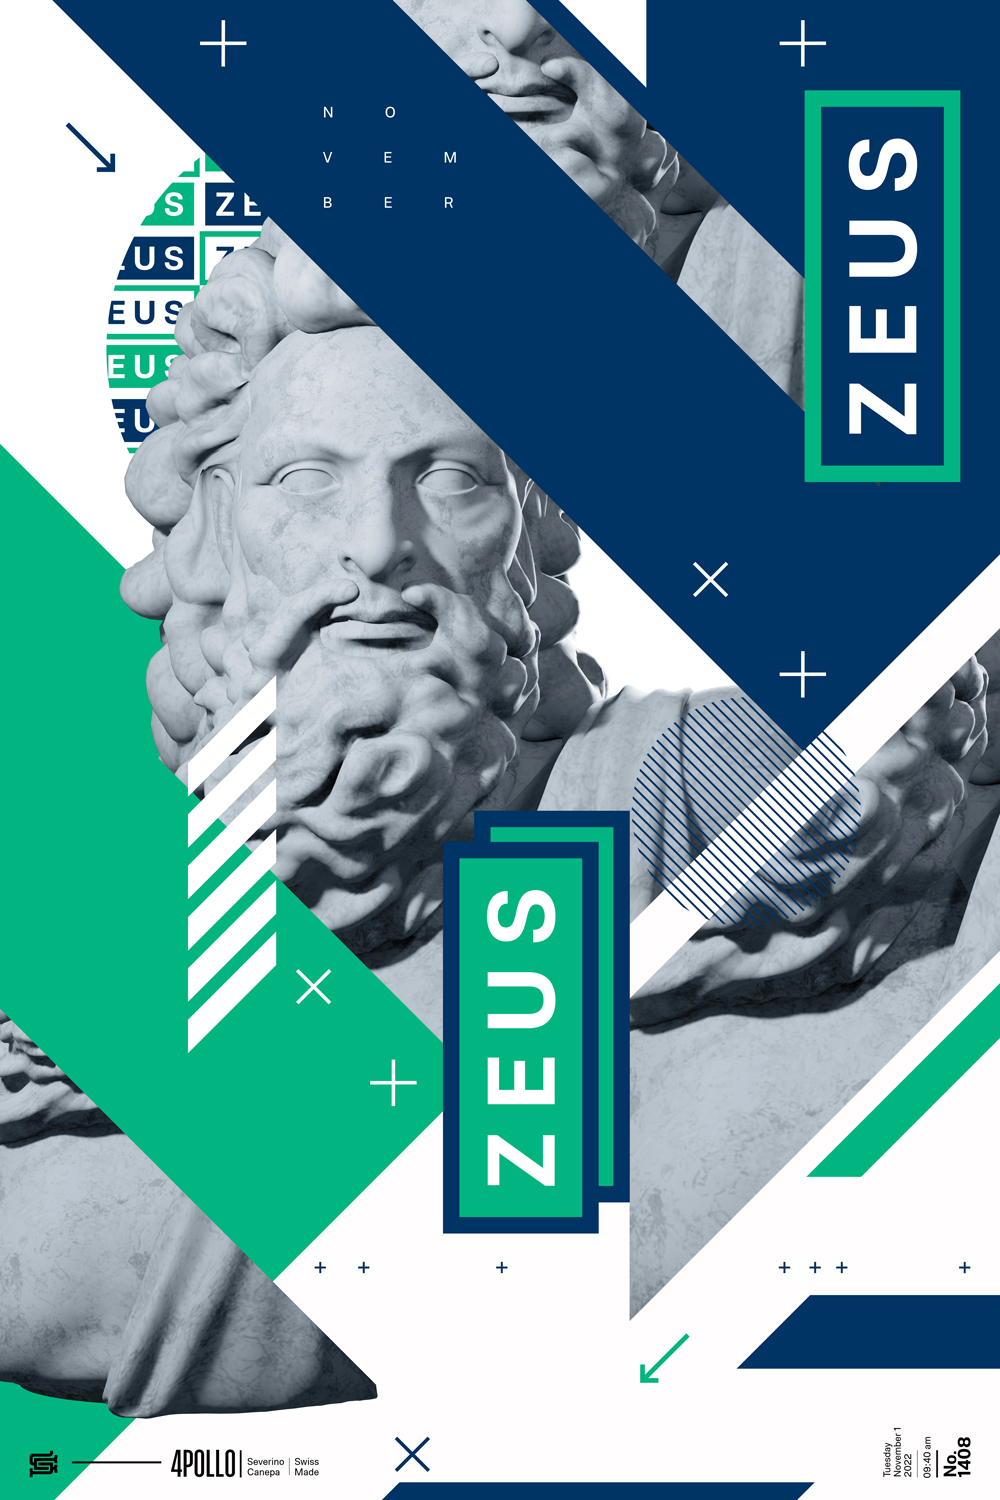 Visual design created with a 3D render of Zeus statue, sharp shapes, typography, and some graphic elements